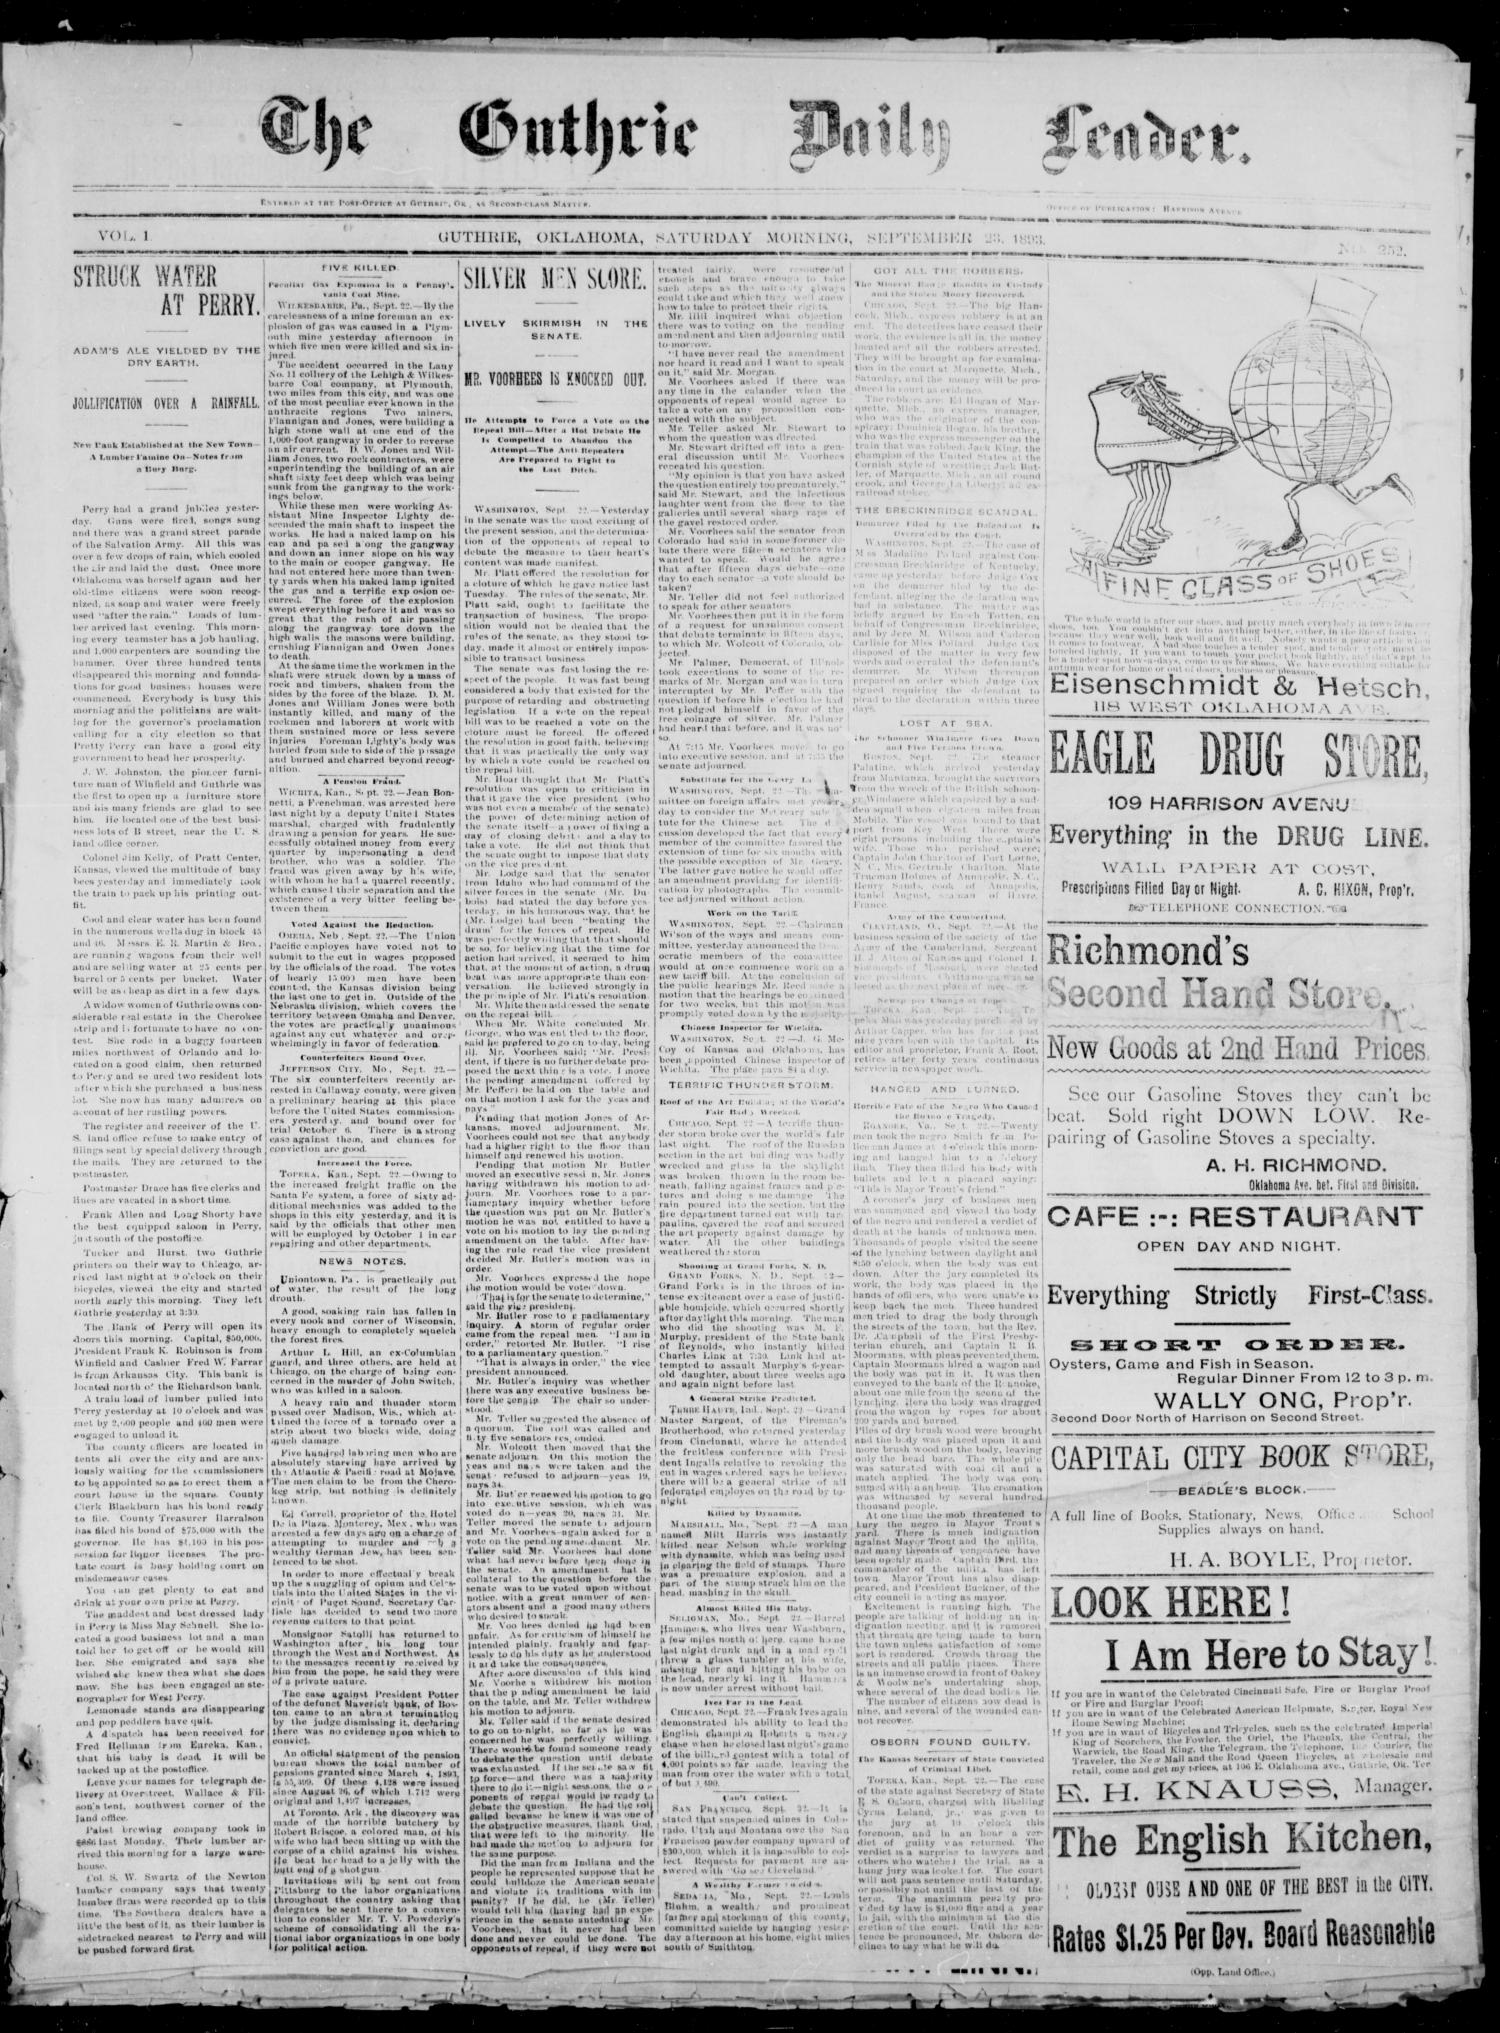 The Guthrie Daily Leader. (Guthrie, Okla.), Vol. 1, No. 252, Ed. 1, Saturday, September 23, 1893
                                                
                                                    [Sequence #]: 1 of 4
                                                